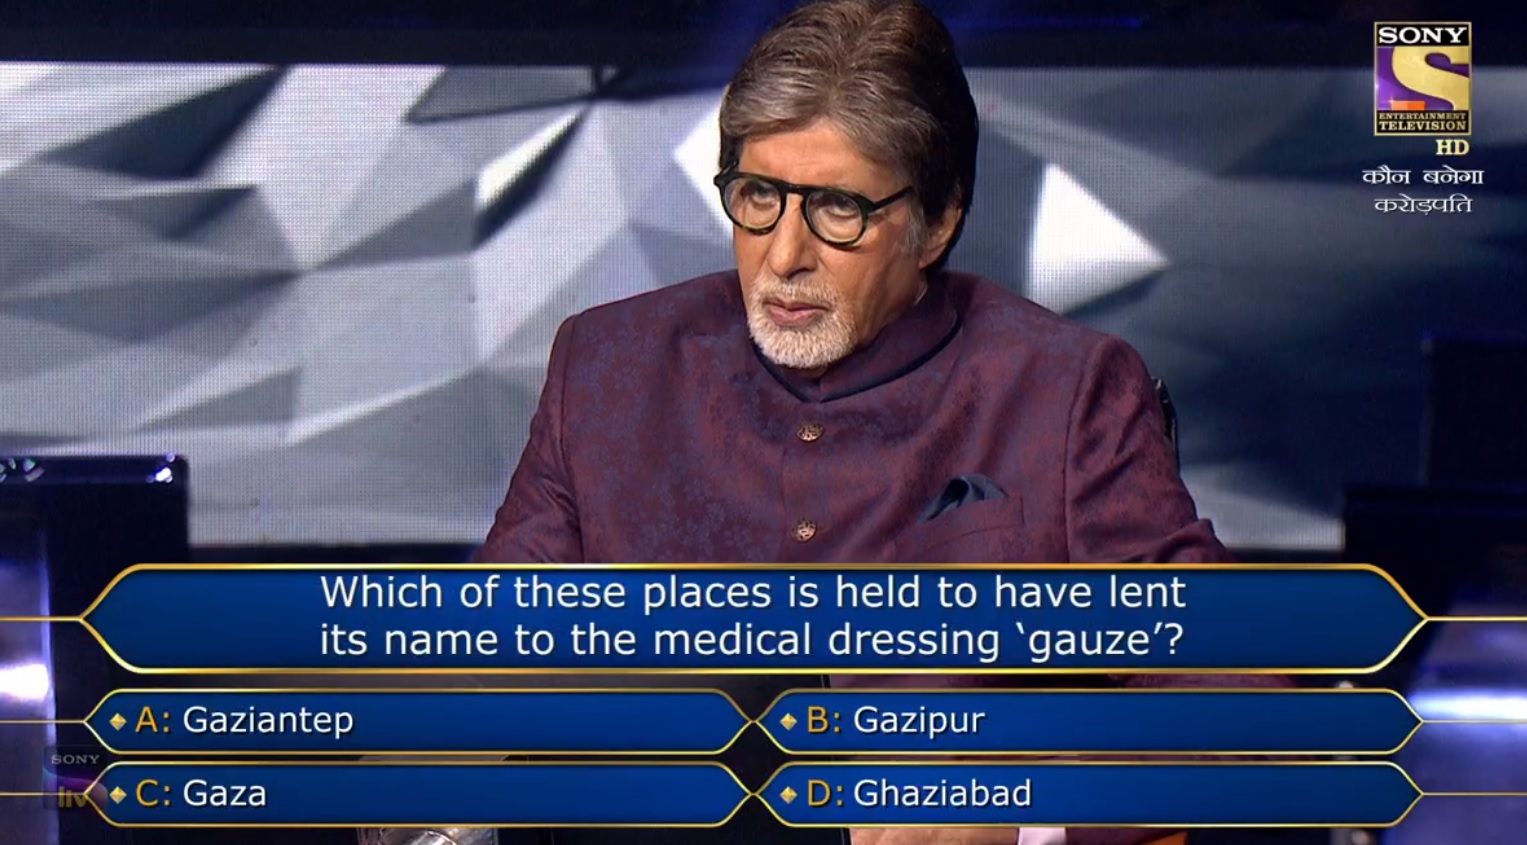 Ques : Which of these places is held to have lent its name to the medical dressing ‘gauze’?